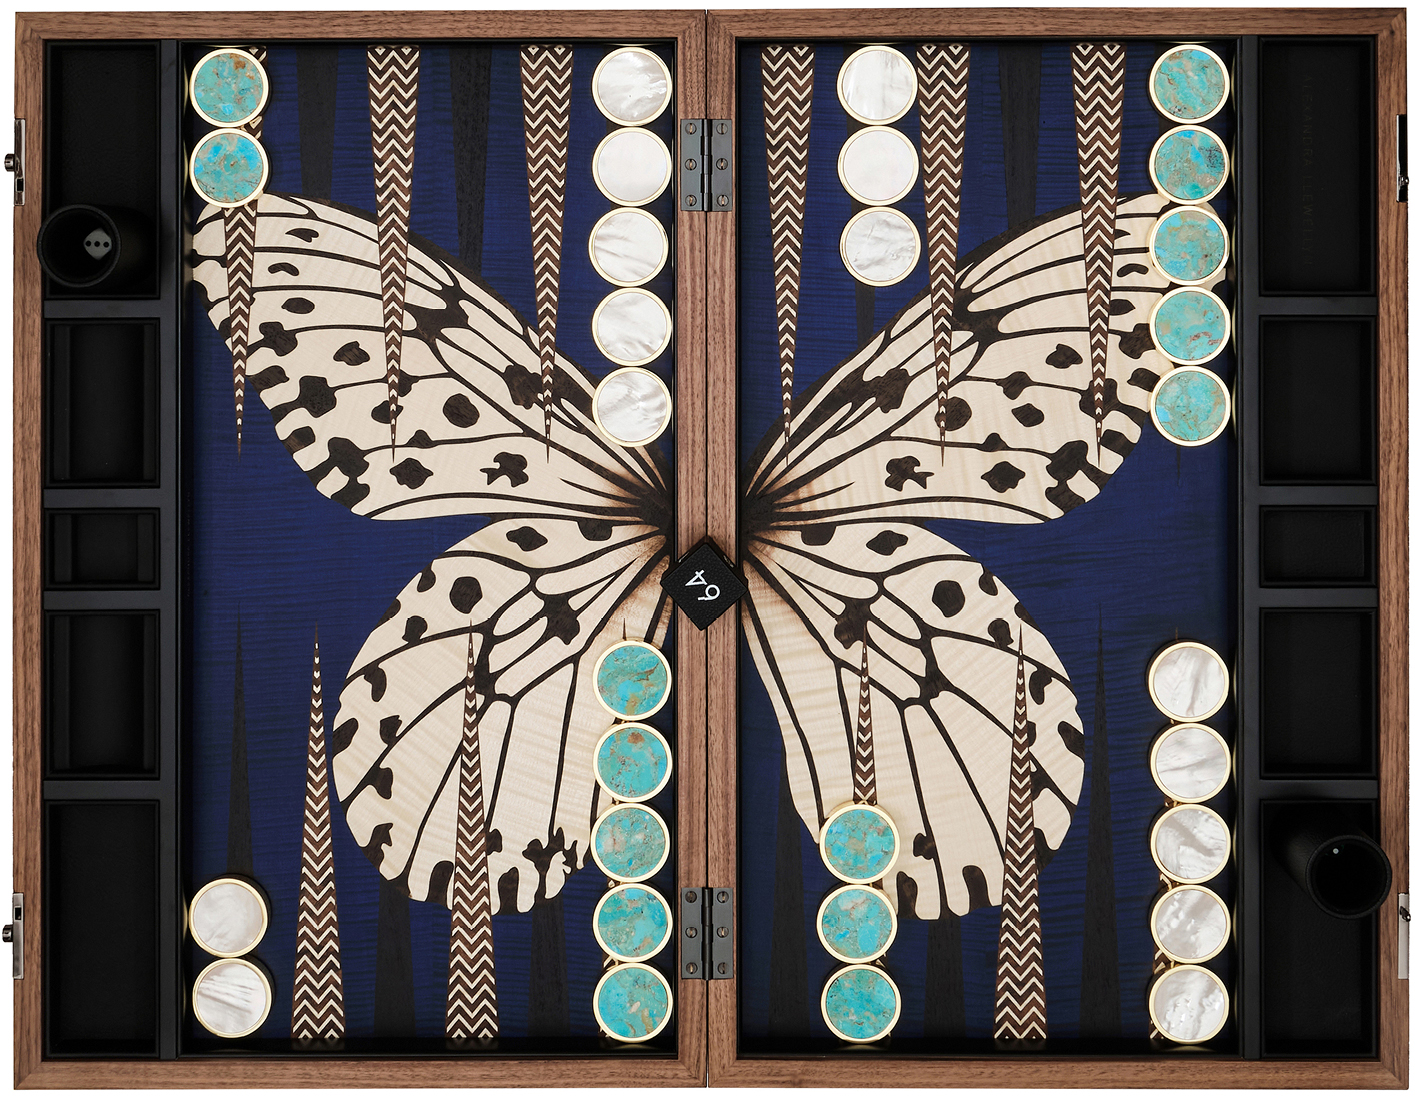 This full-size Alexandra Llewellyn set, also from the Net-a-Porter commission, features a Malayan tree nymph butterfly